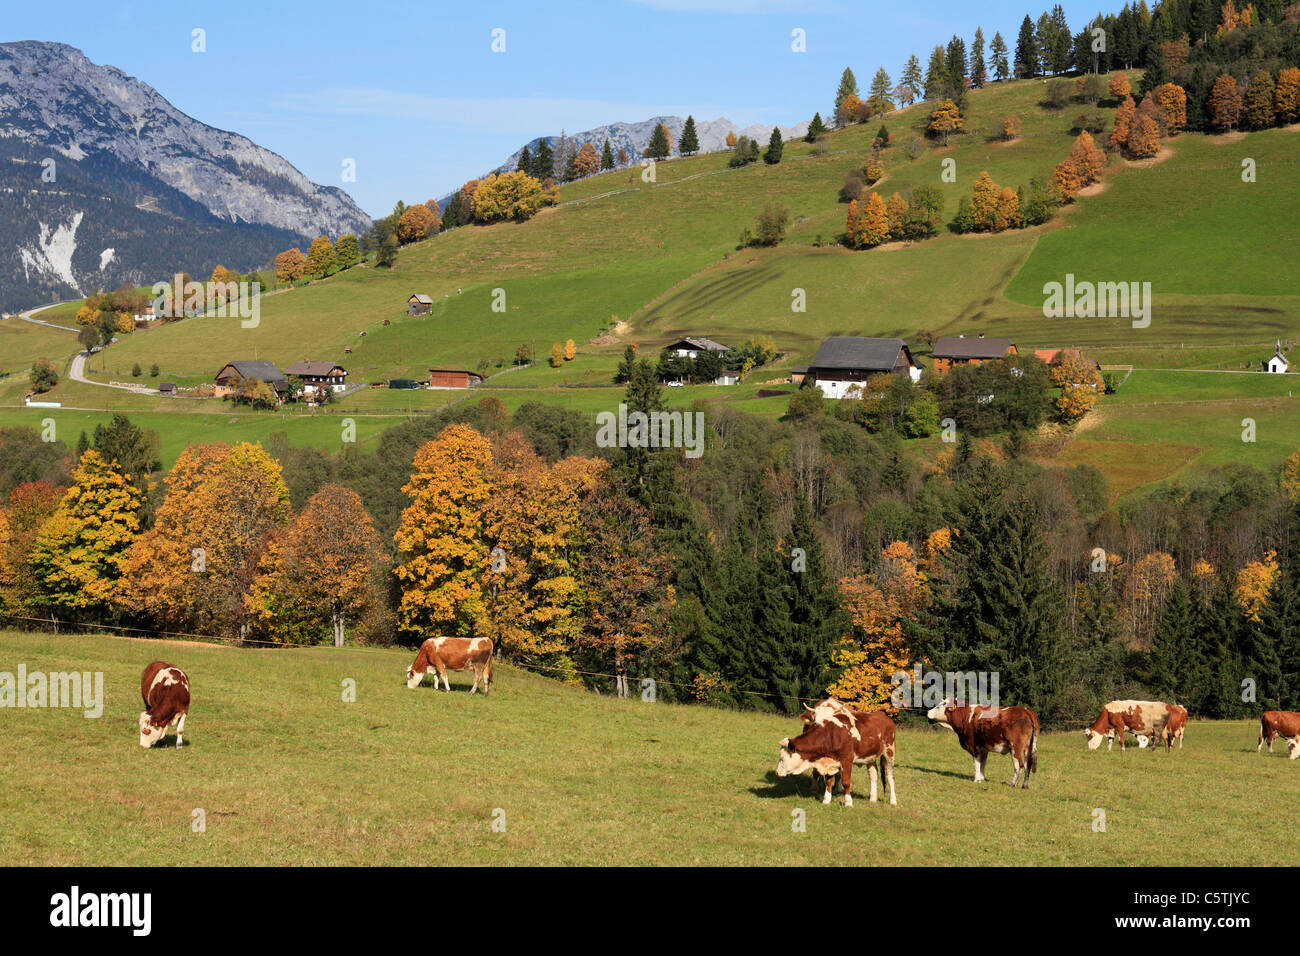 Austria, Styria, View of cattle grazing on seewigtal valley in schladminger tauern mountains Stock Photo